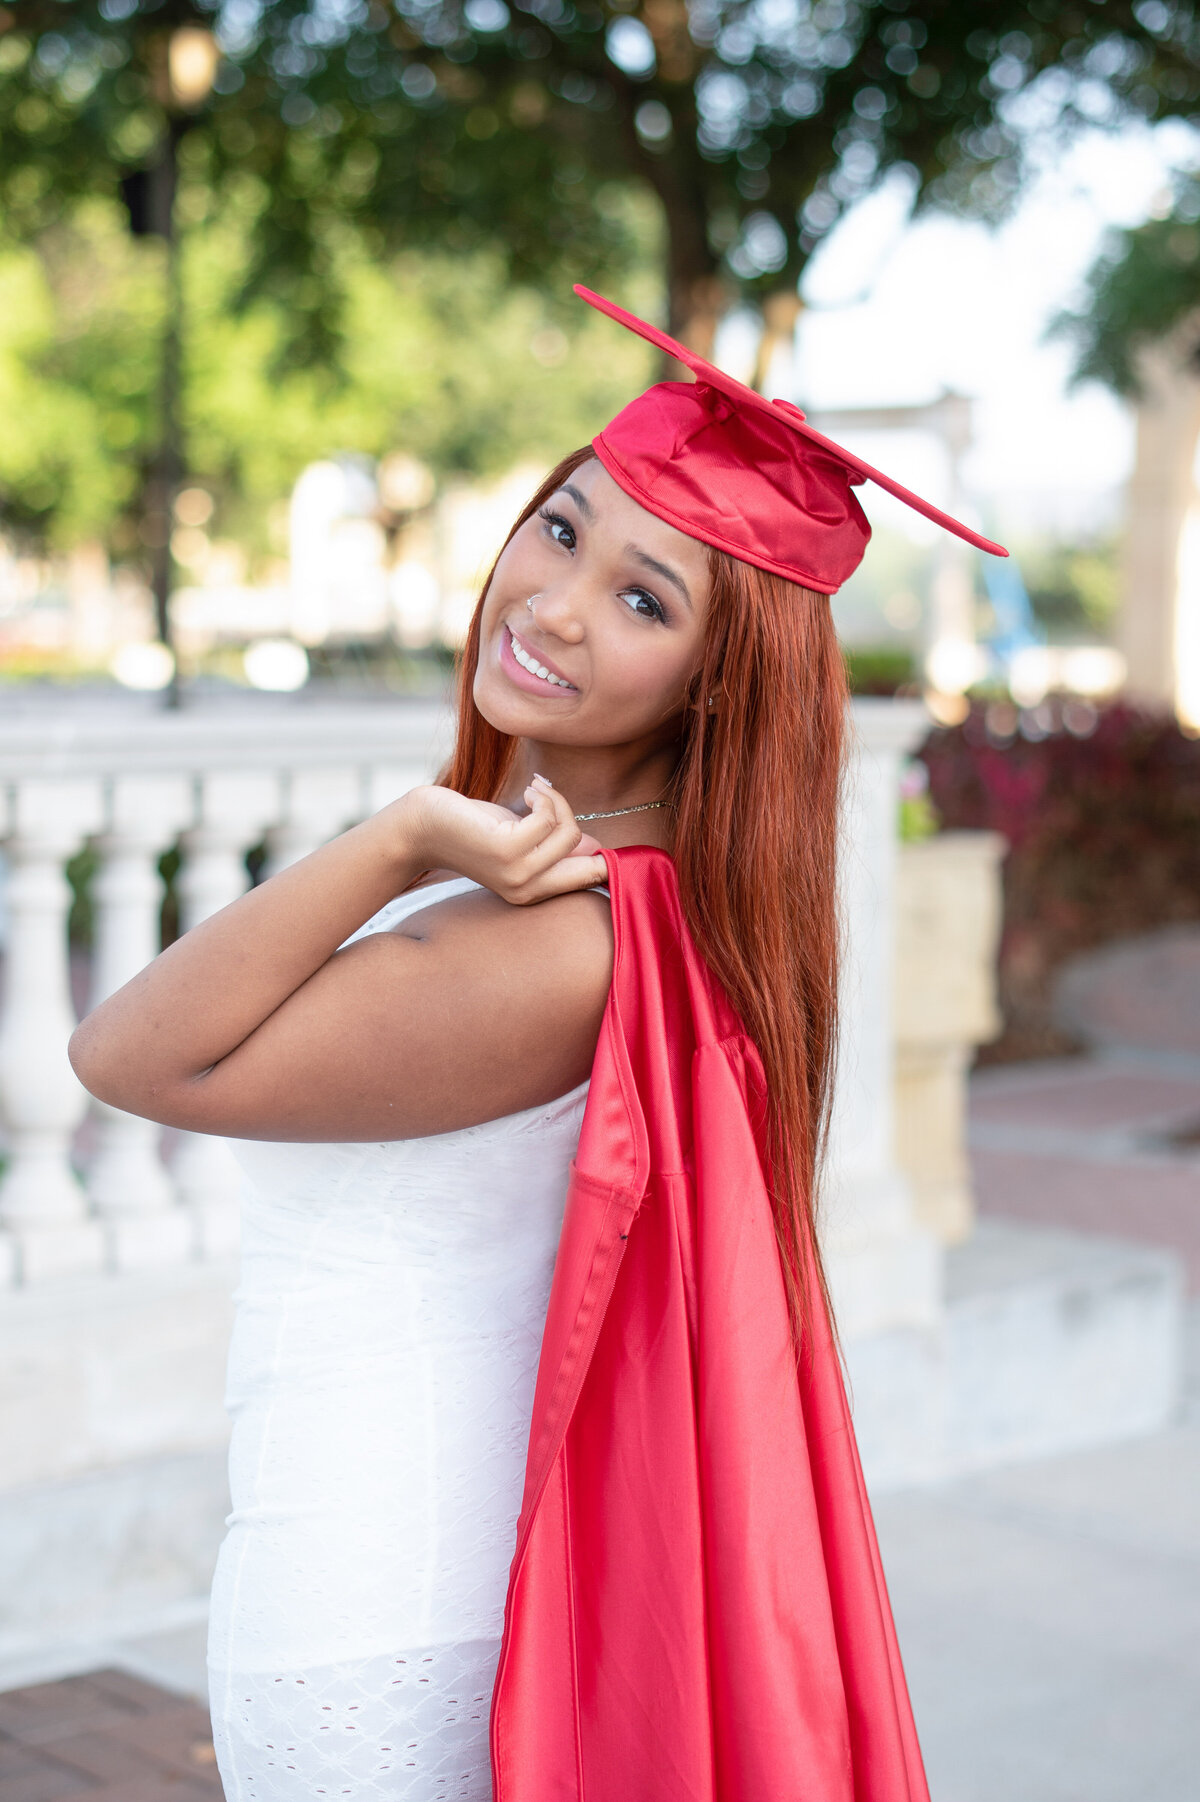 High school senior girl wearing cap and holding gown over her shoulder.